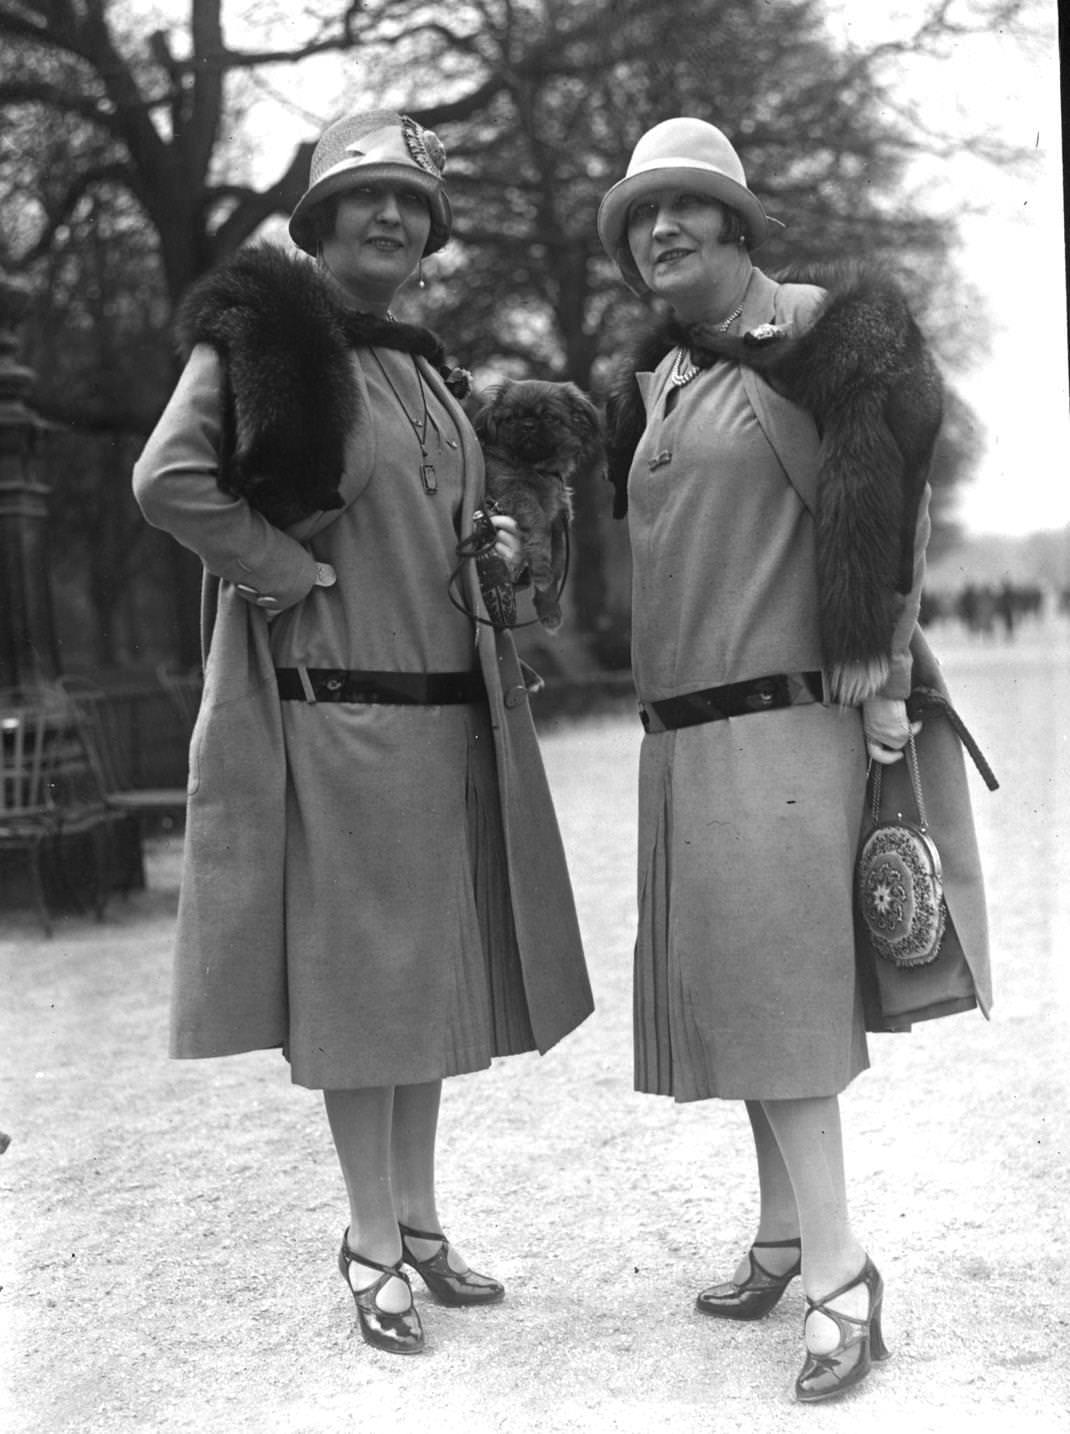 Spring Outfits with long waisted dresses with front pleats worn with matching loose coats, cloche hats and fox furs, 1925